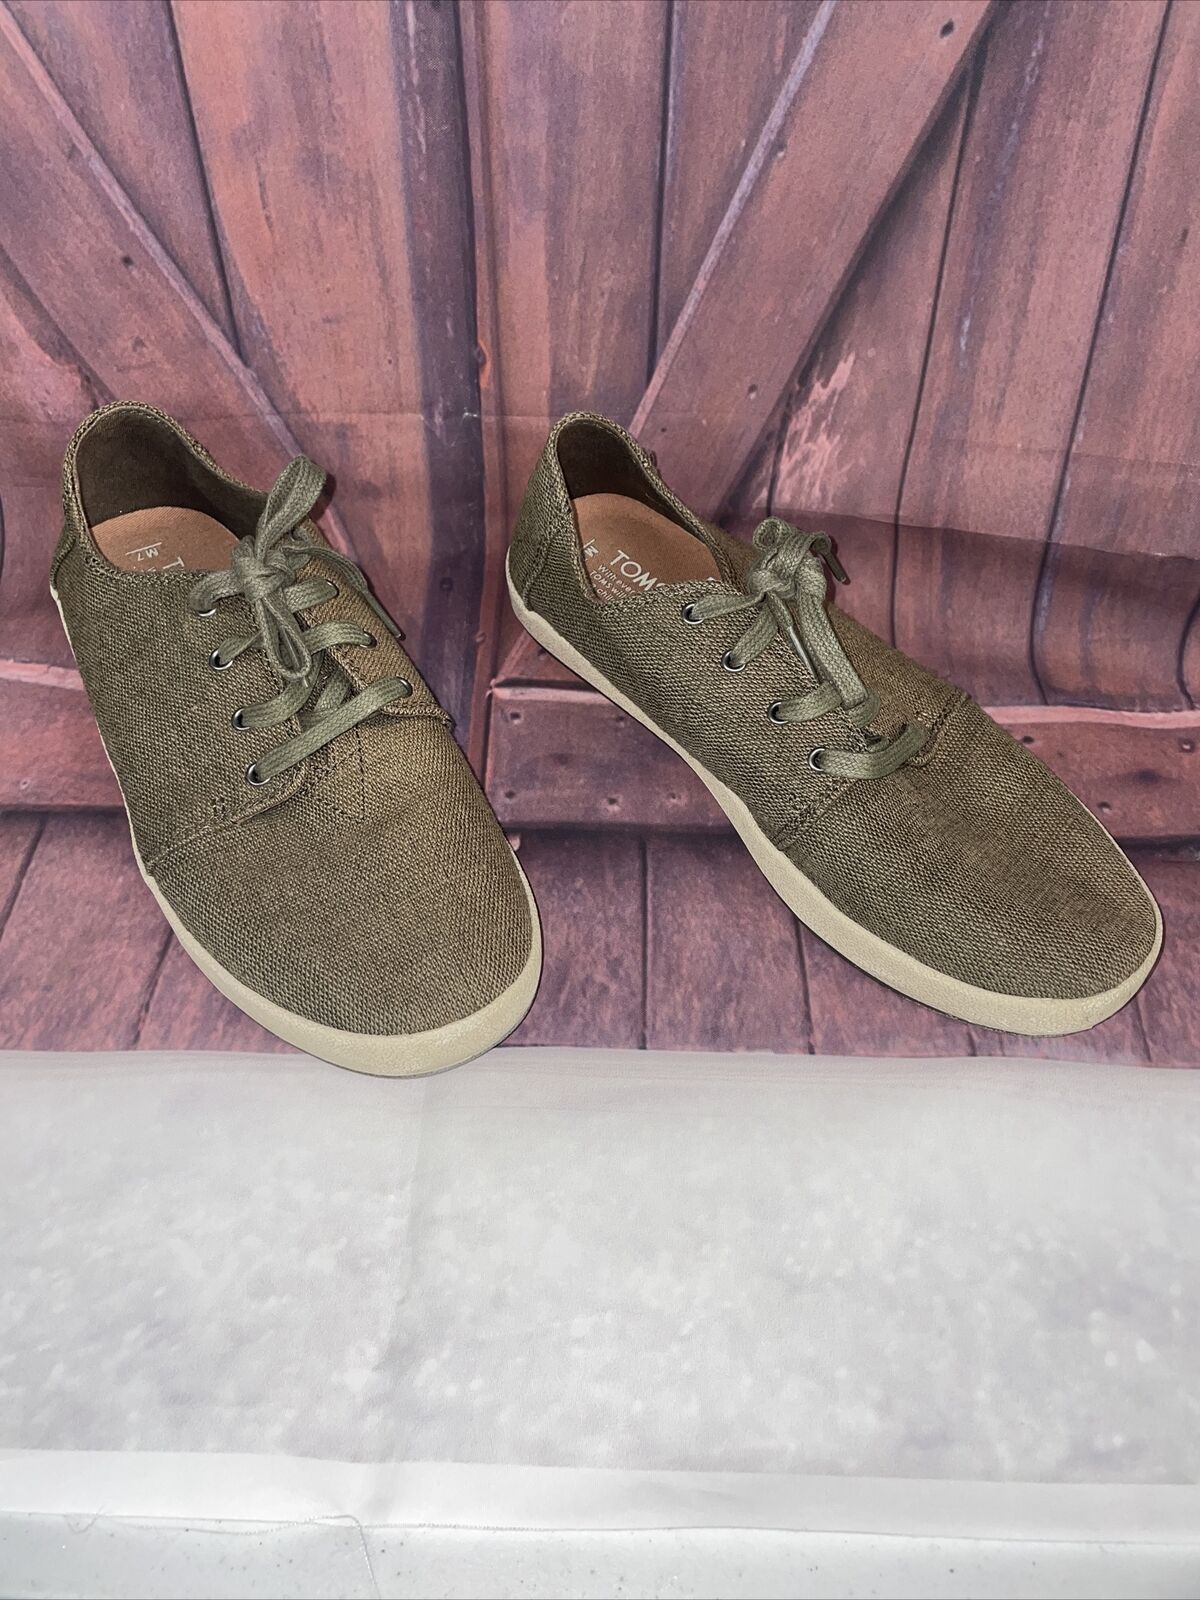 Toms Green Lace Up Shoes Men’s Size 7 With or Without Laces New_4030